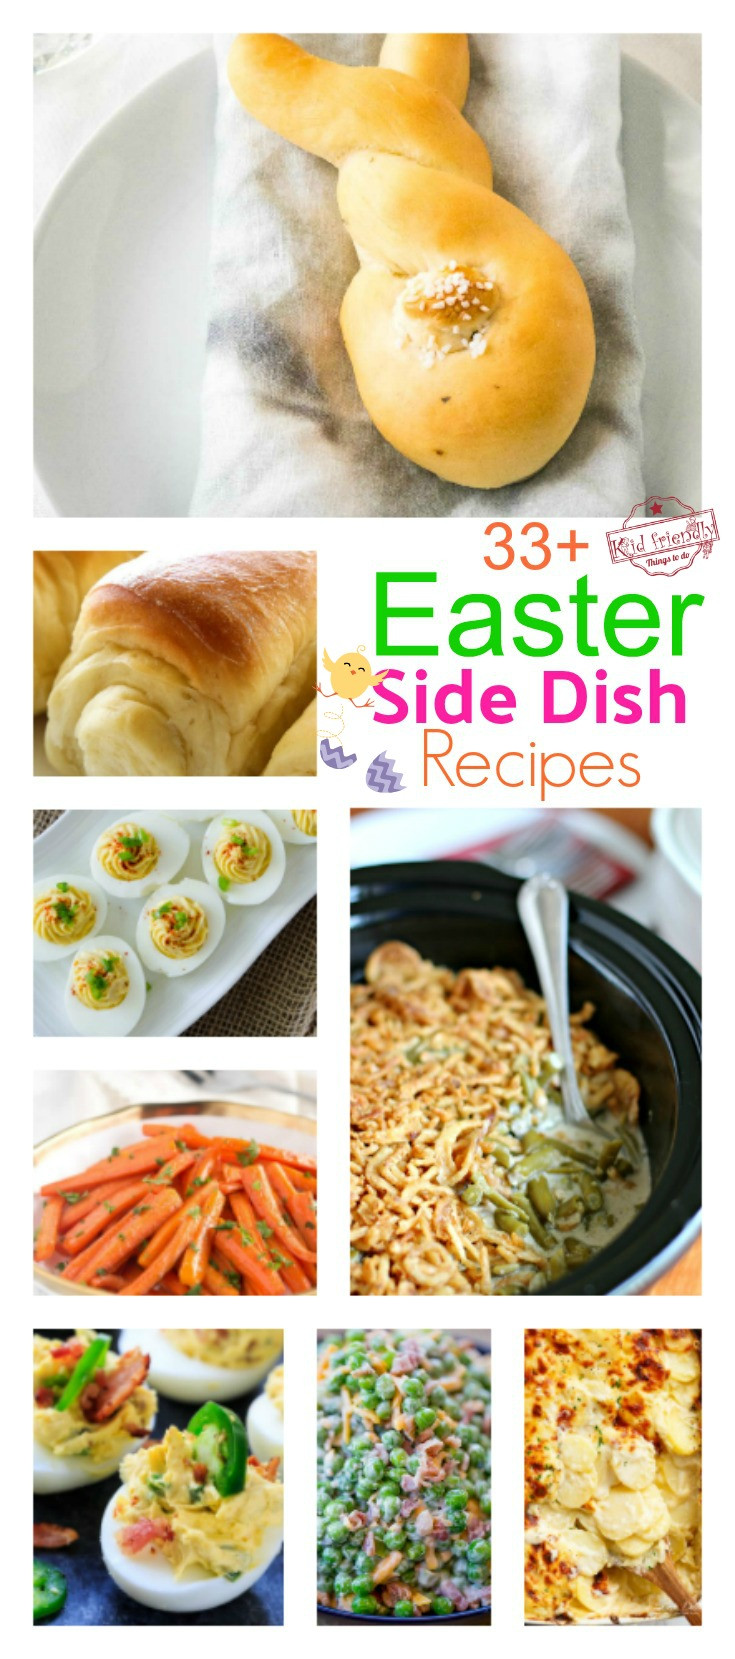 Side Dishes For Easter
 Over 33 Easter Side Dish Recipes for Your Celebration Dinner